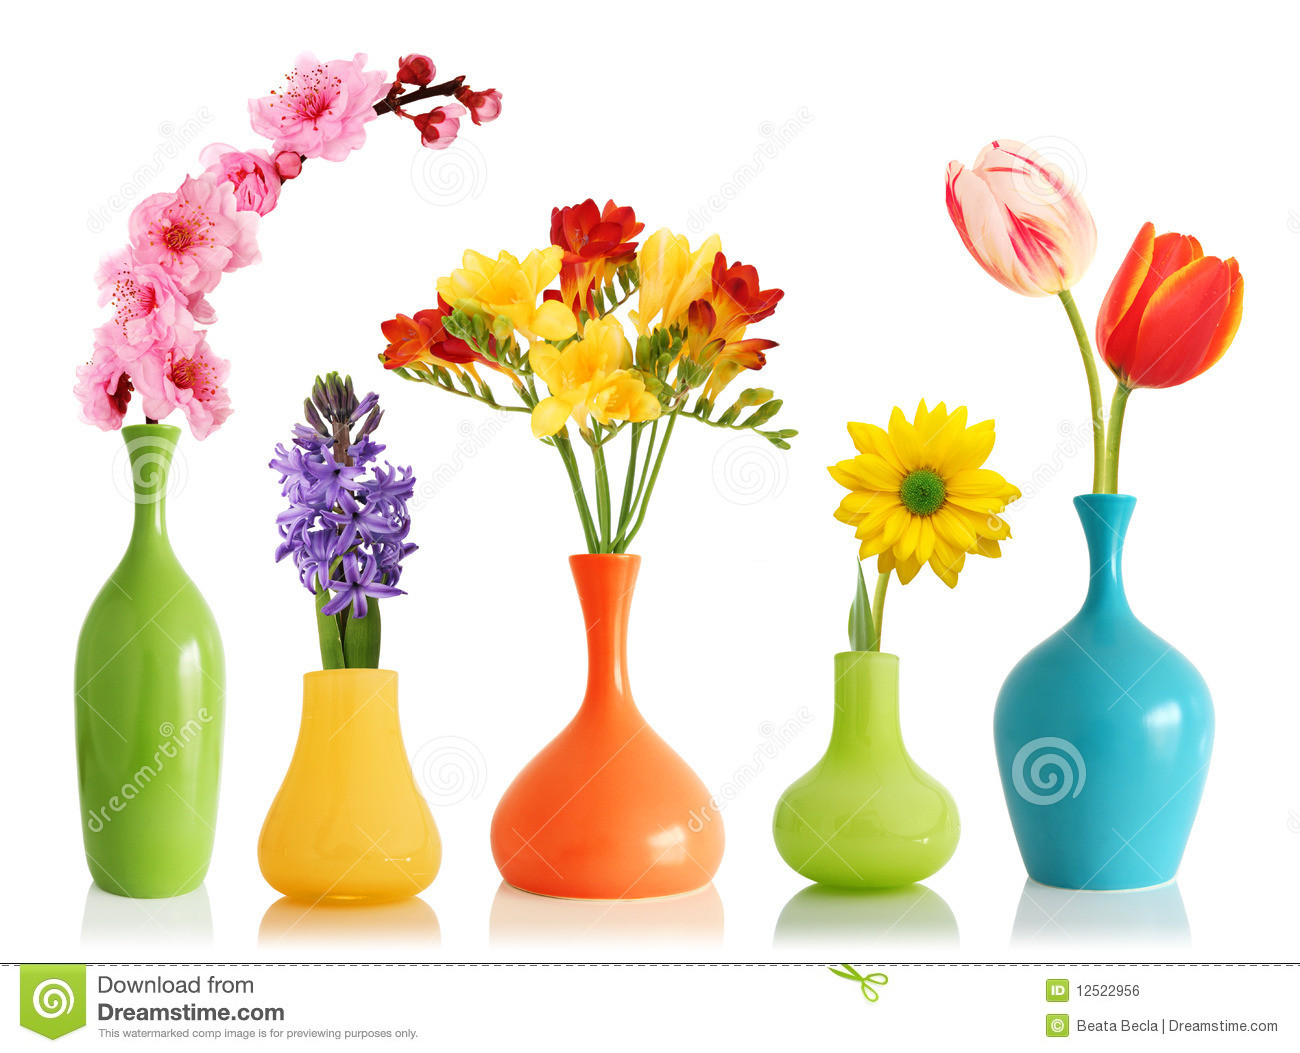 27 Lovely Small Navy Blue Vase 2024 free download small navy blue vase of spring flowers in vases stock photo image of gerber 12522956 throughout spring flowers in vases